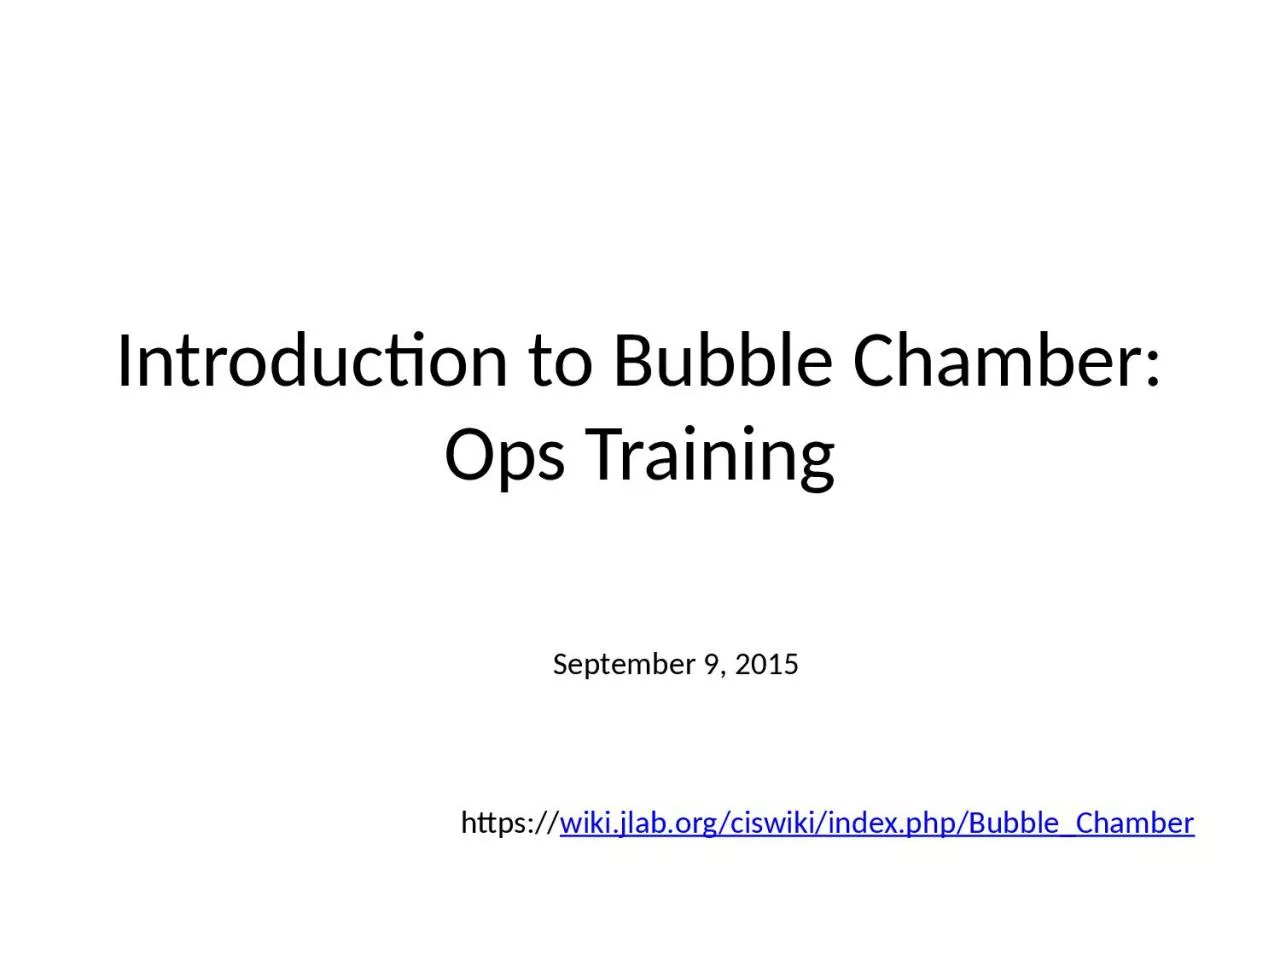 Introduction to Bubble Chamber: